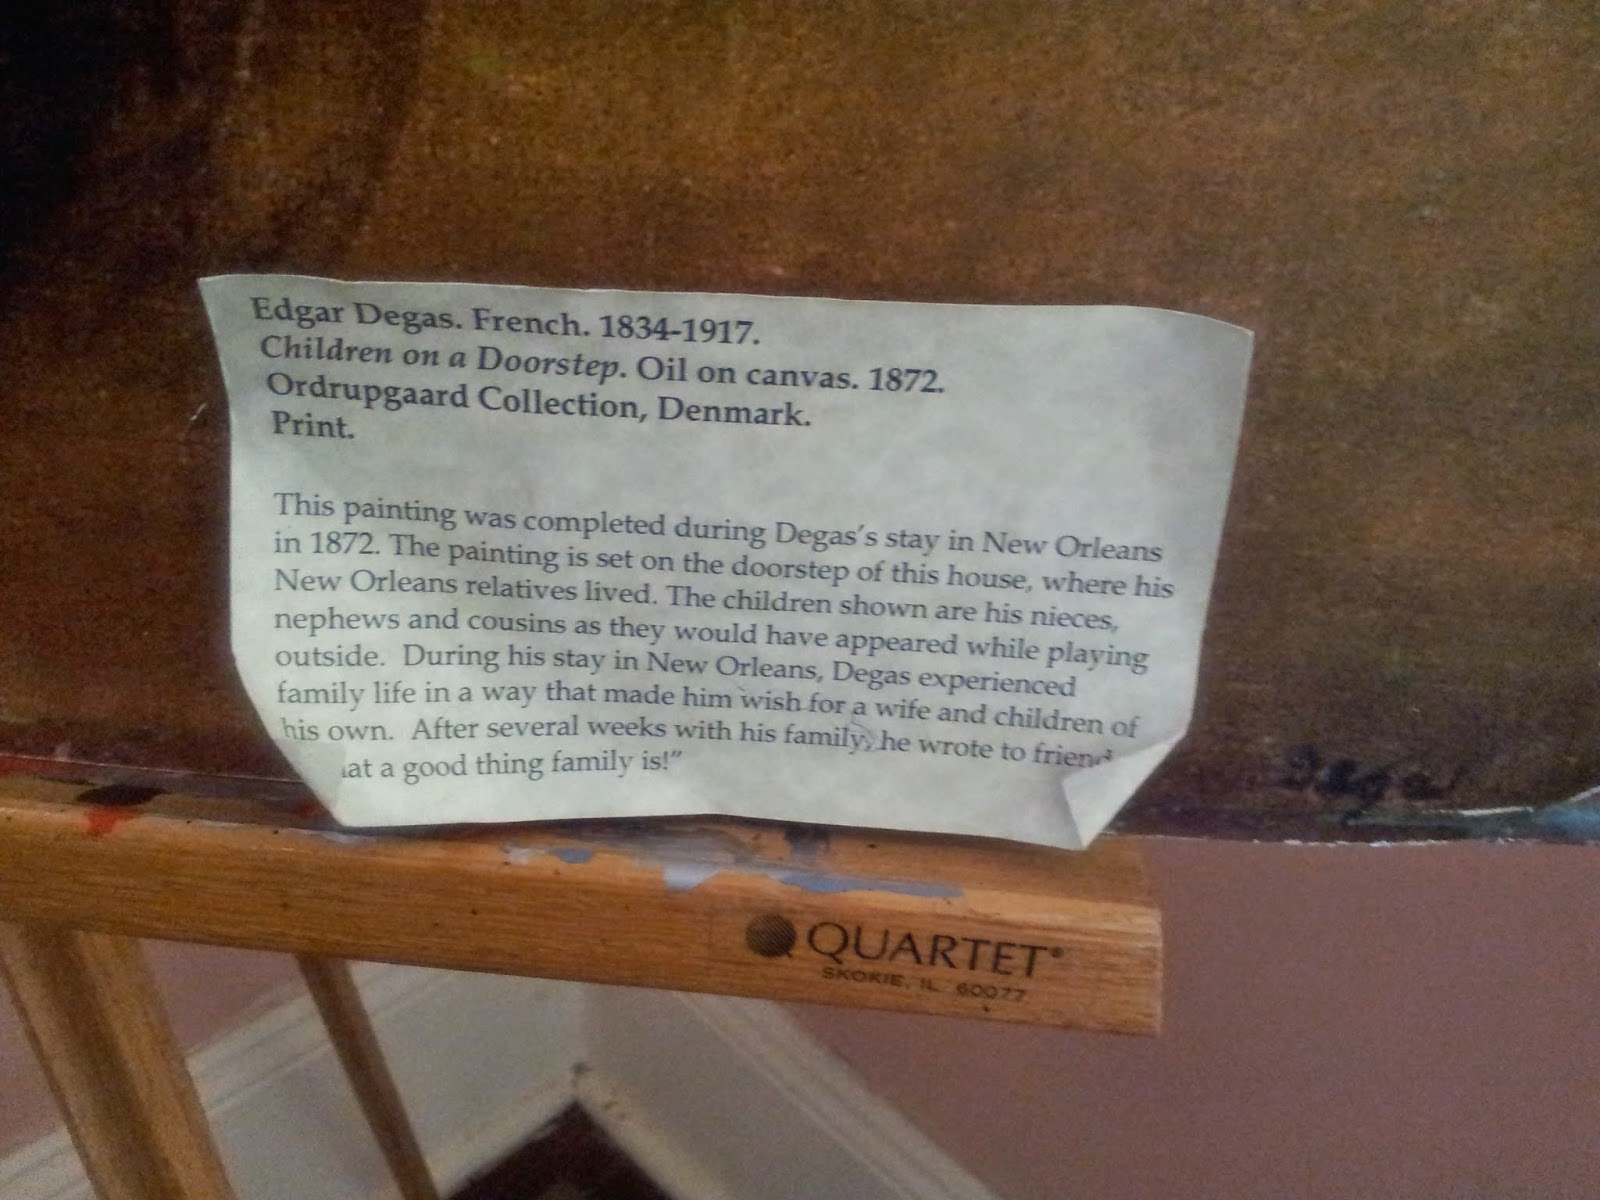 Description of Painting by Edgar Degas - 'Children on a doorstep'  at Degas House, New Orleans